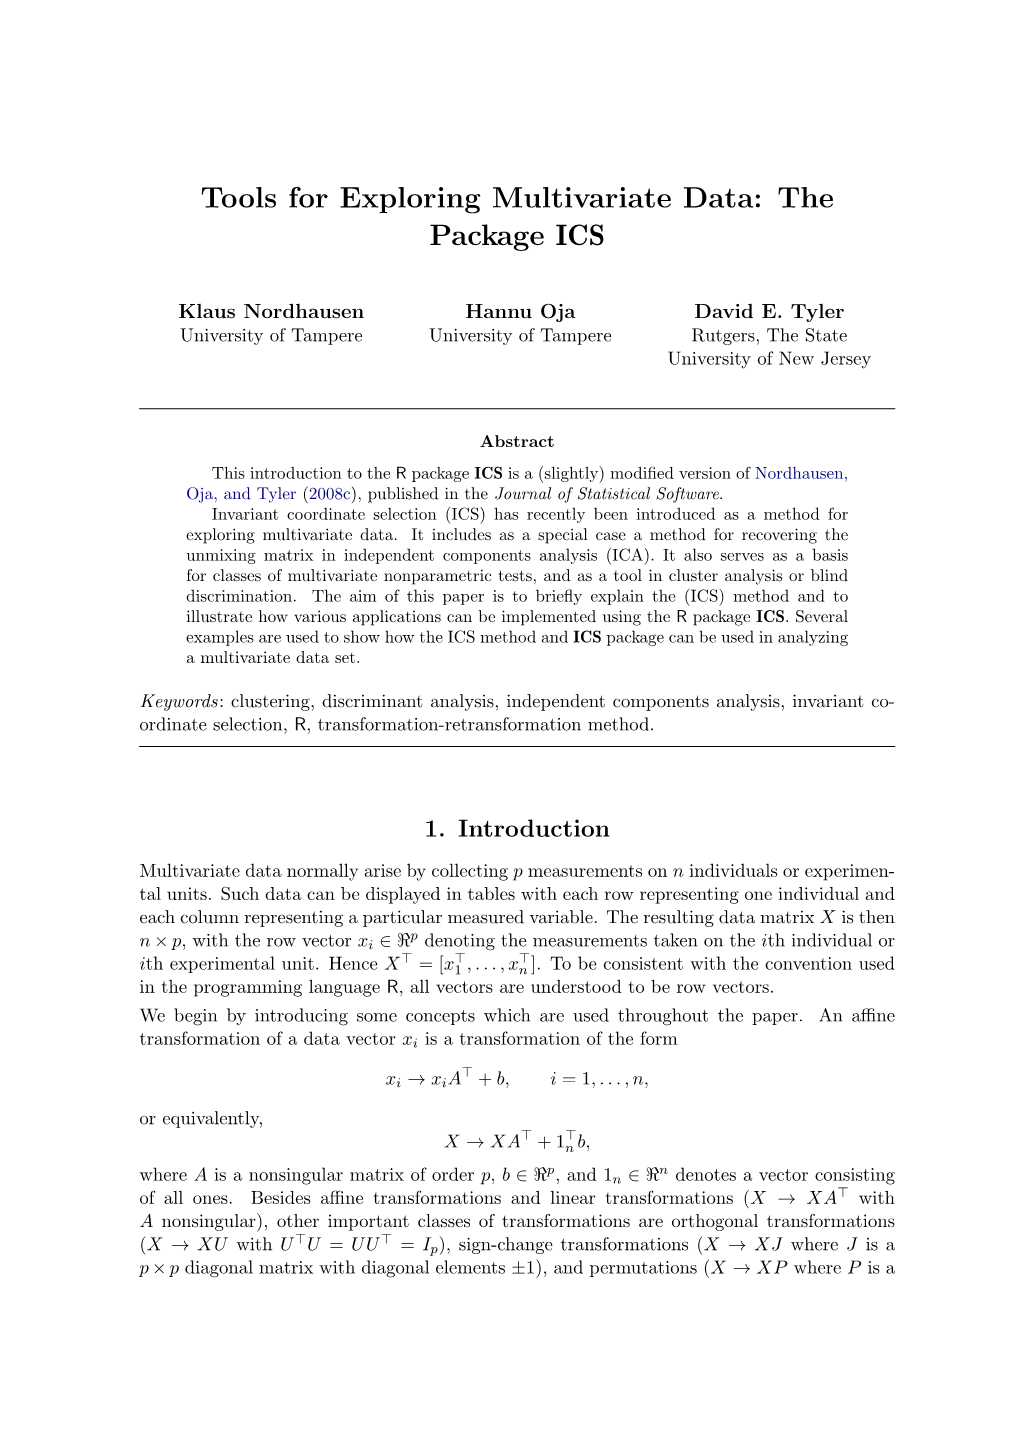 Tools for Exploring Multivariate Data: the Package ICS